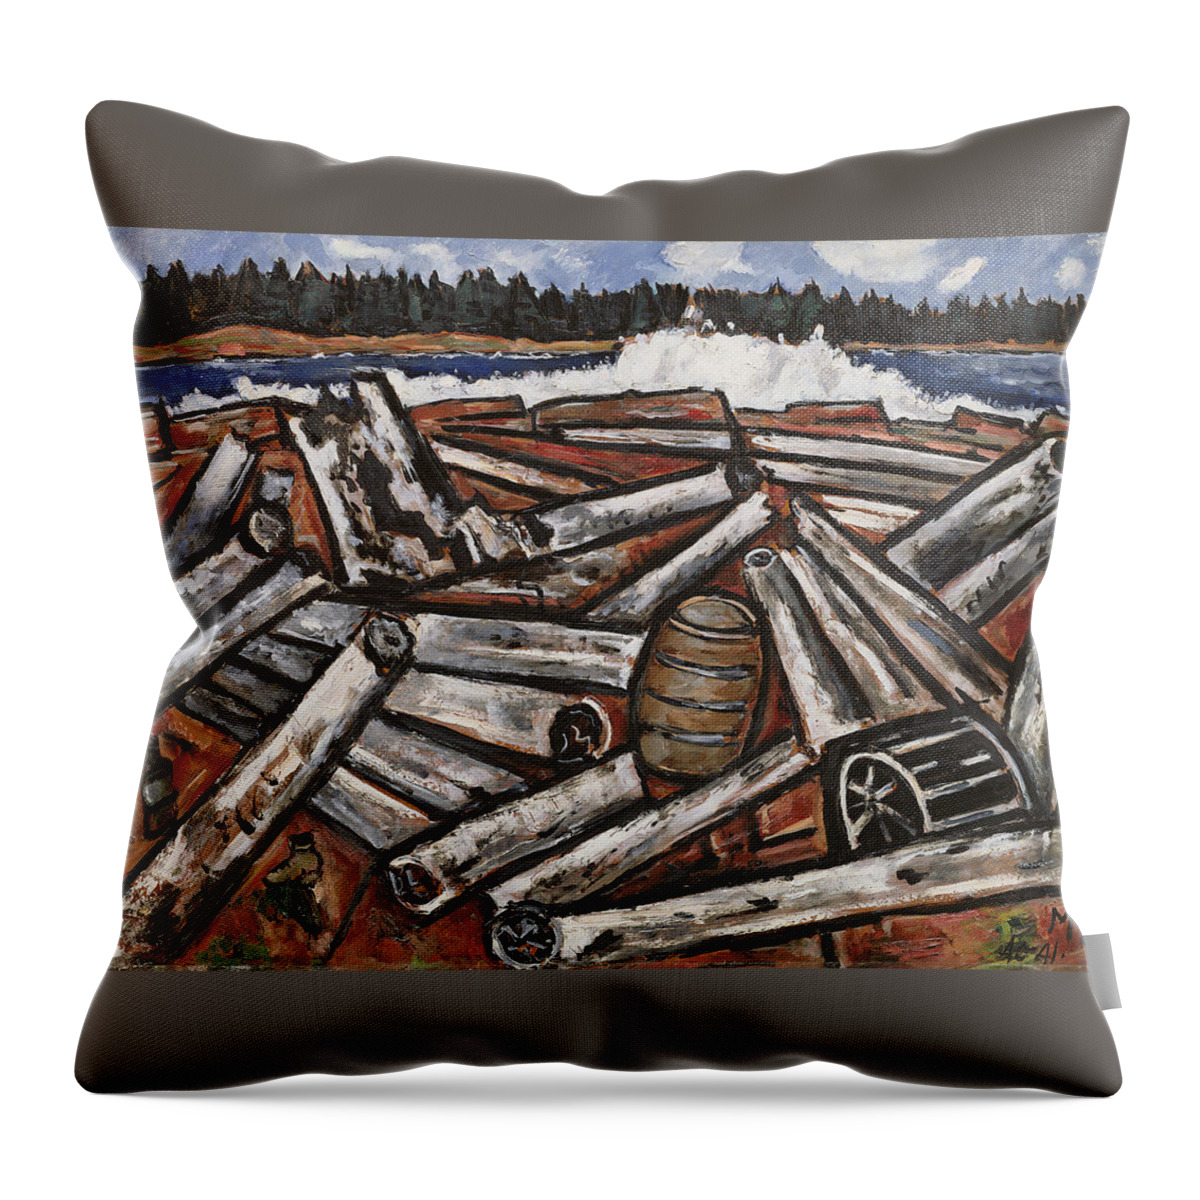 “logjam (backwaters Up Millinocket Way No. 3) By Marsden Hartley Throw Pillow featuring the painting Logjam by MotionAge Designs